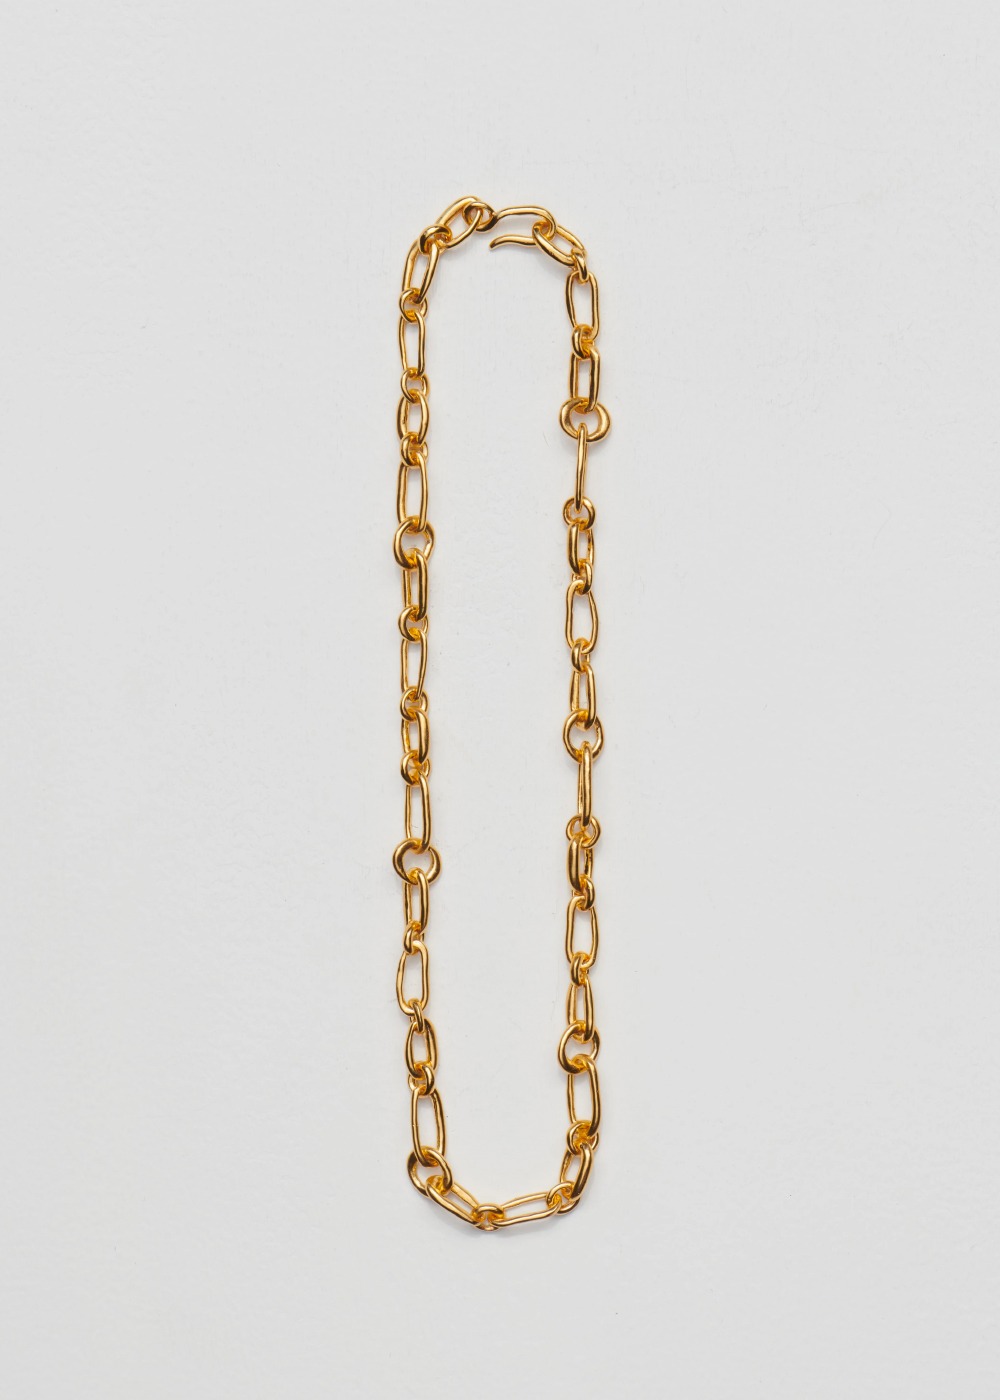 Gold Grecian Chain Necklace